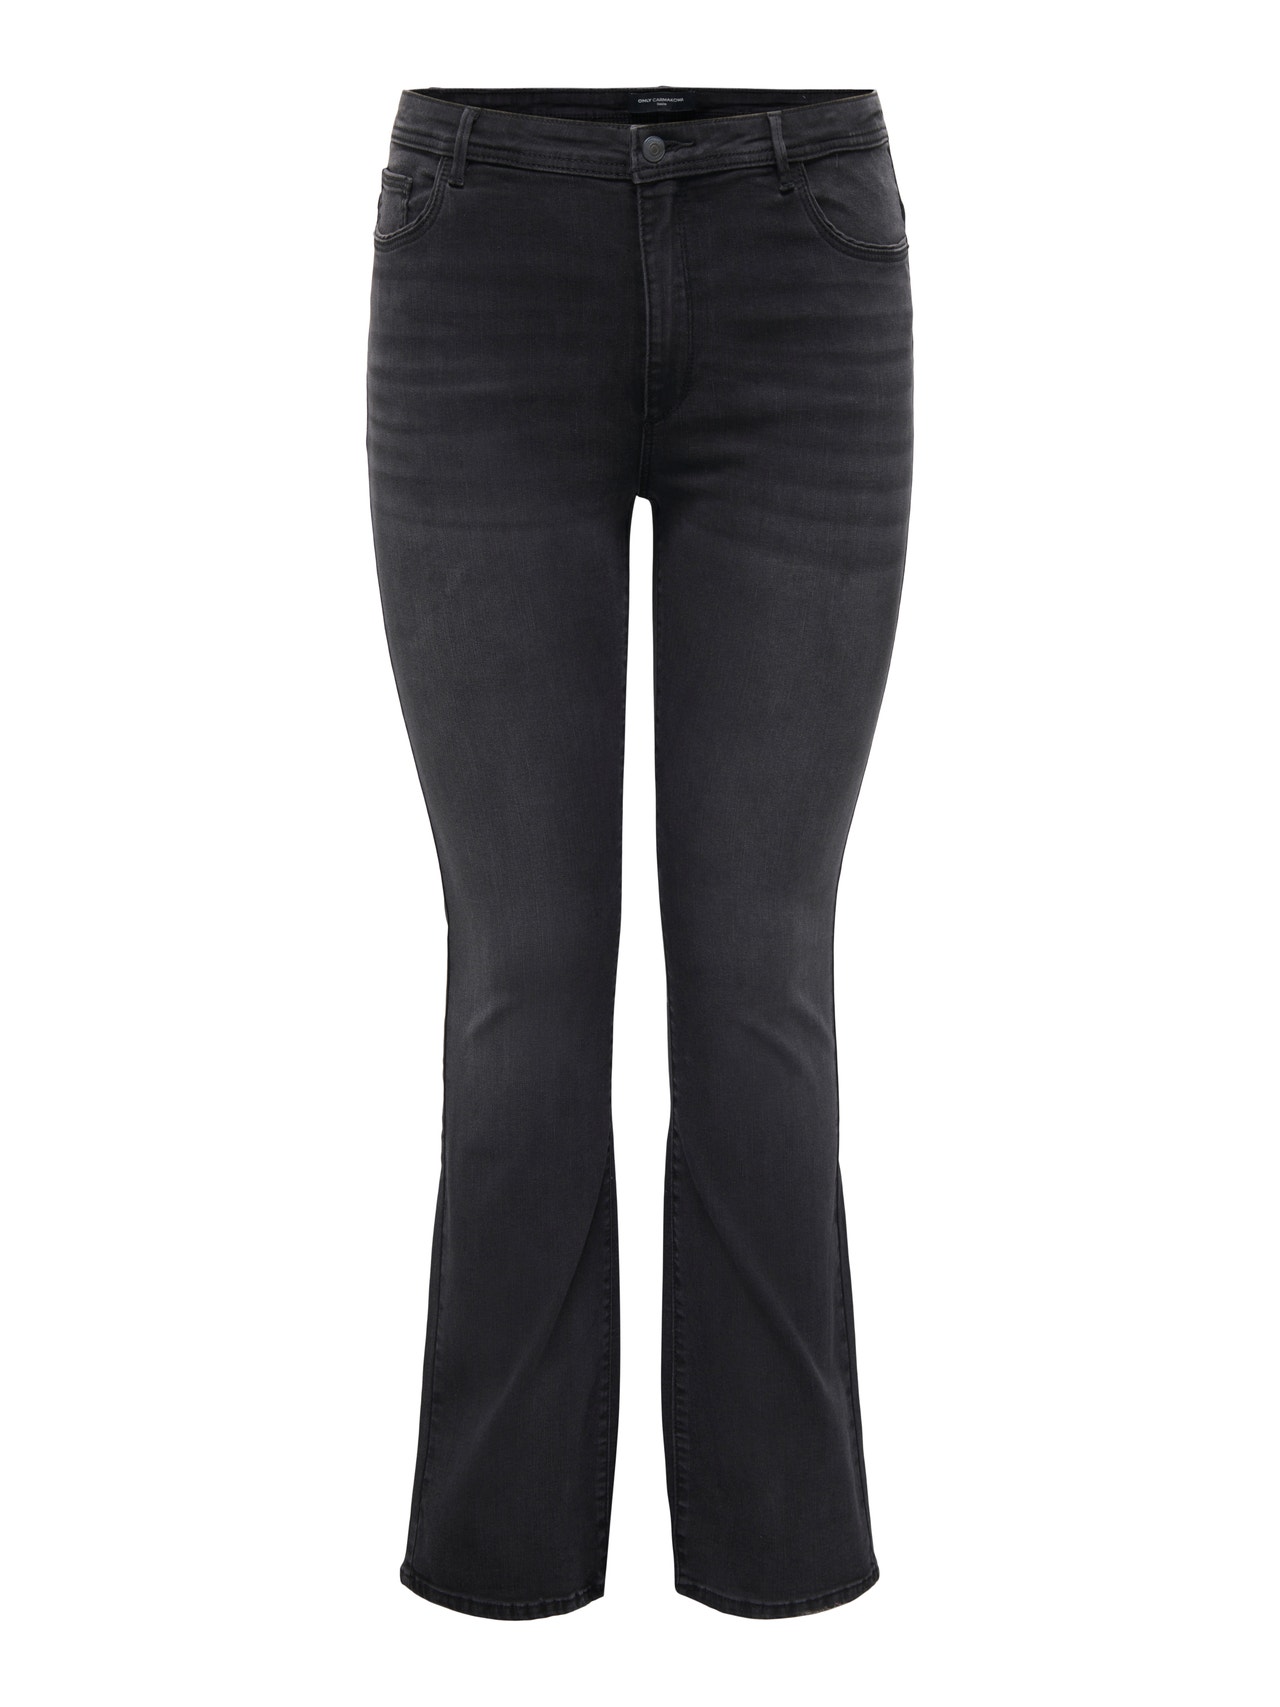 ONLY Curvy CARSally high-waist Flared Jeans -Washed Black - 15277229